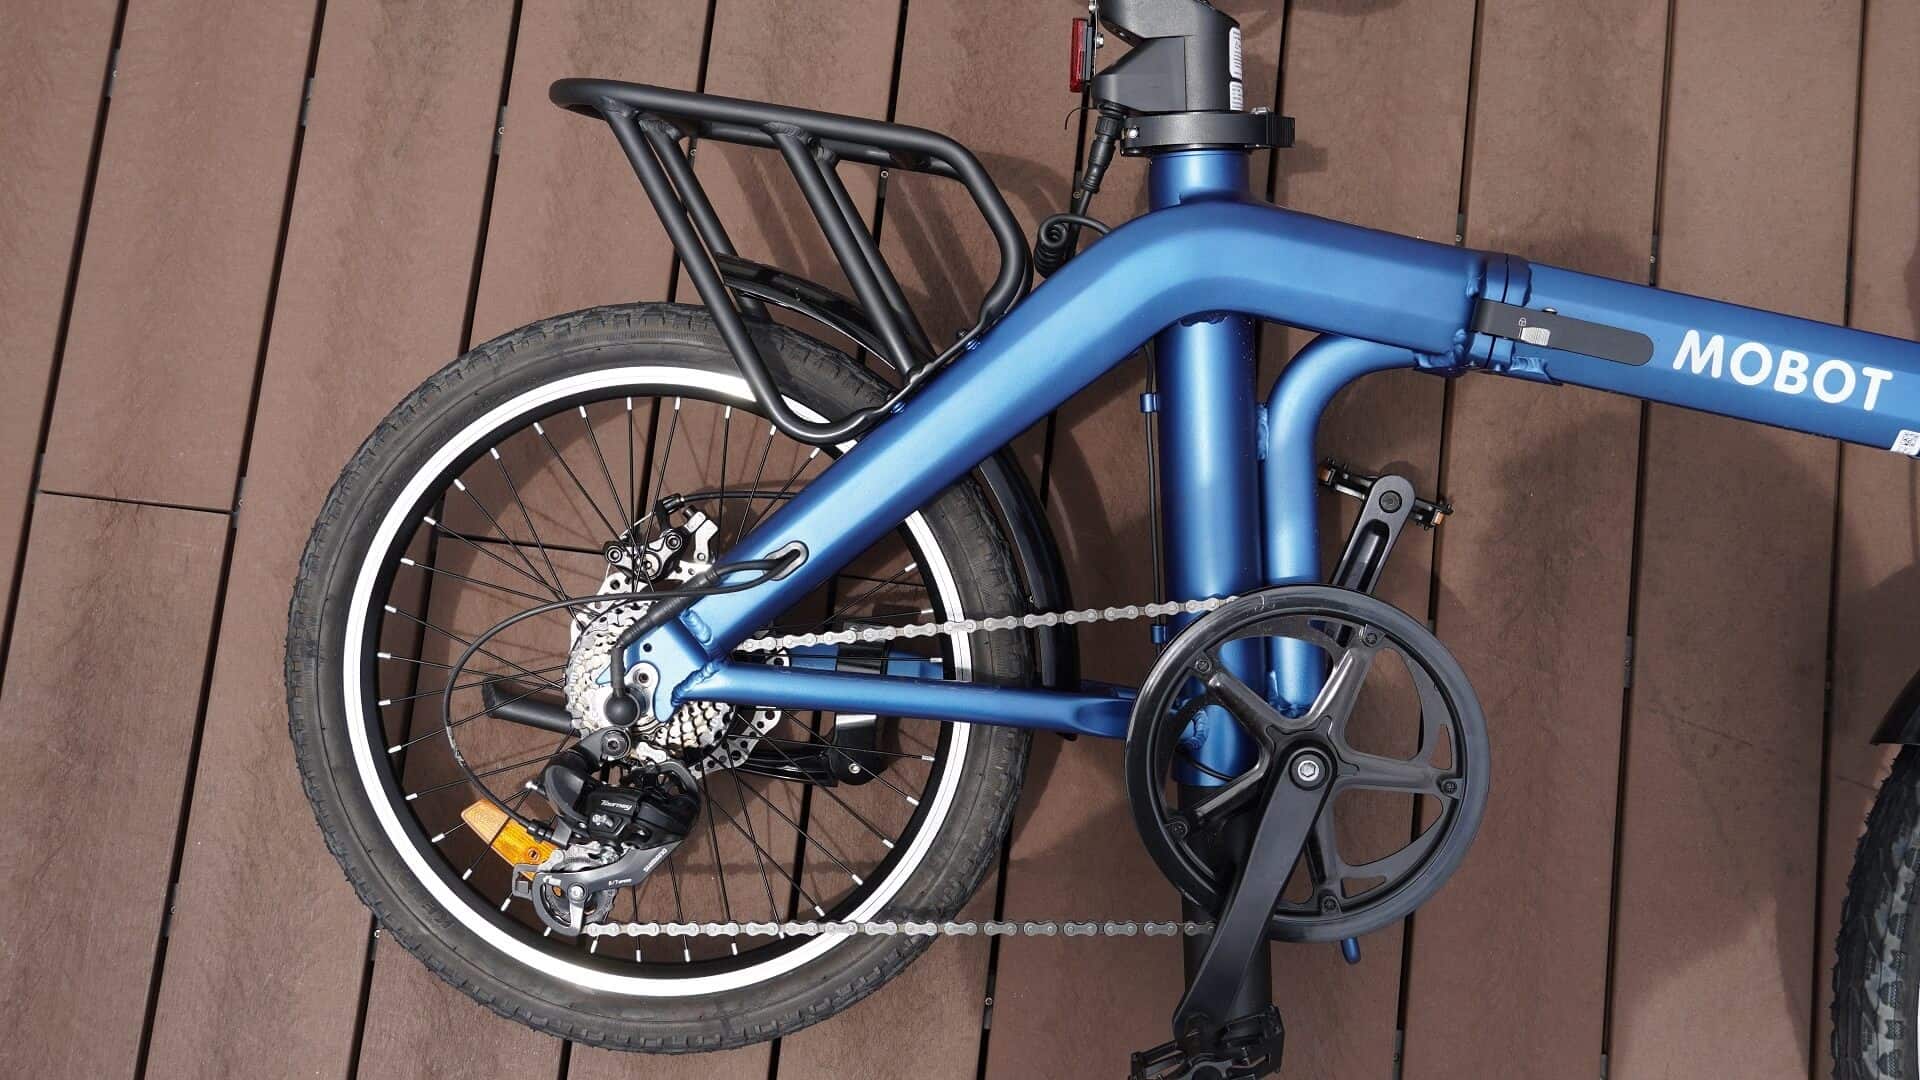 MOBOT S3 (NAVY BLUE) electric bicycle rear rack